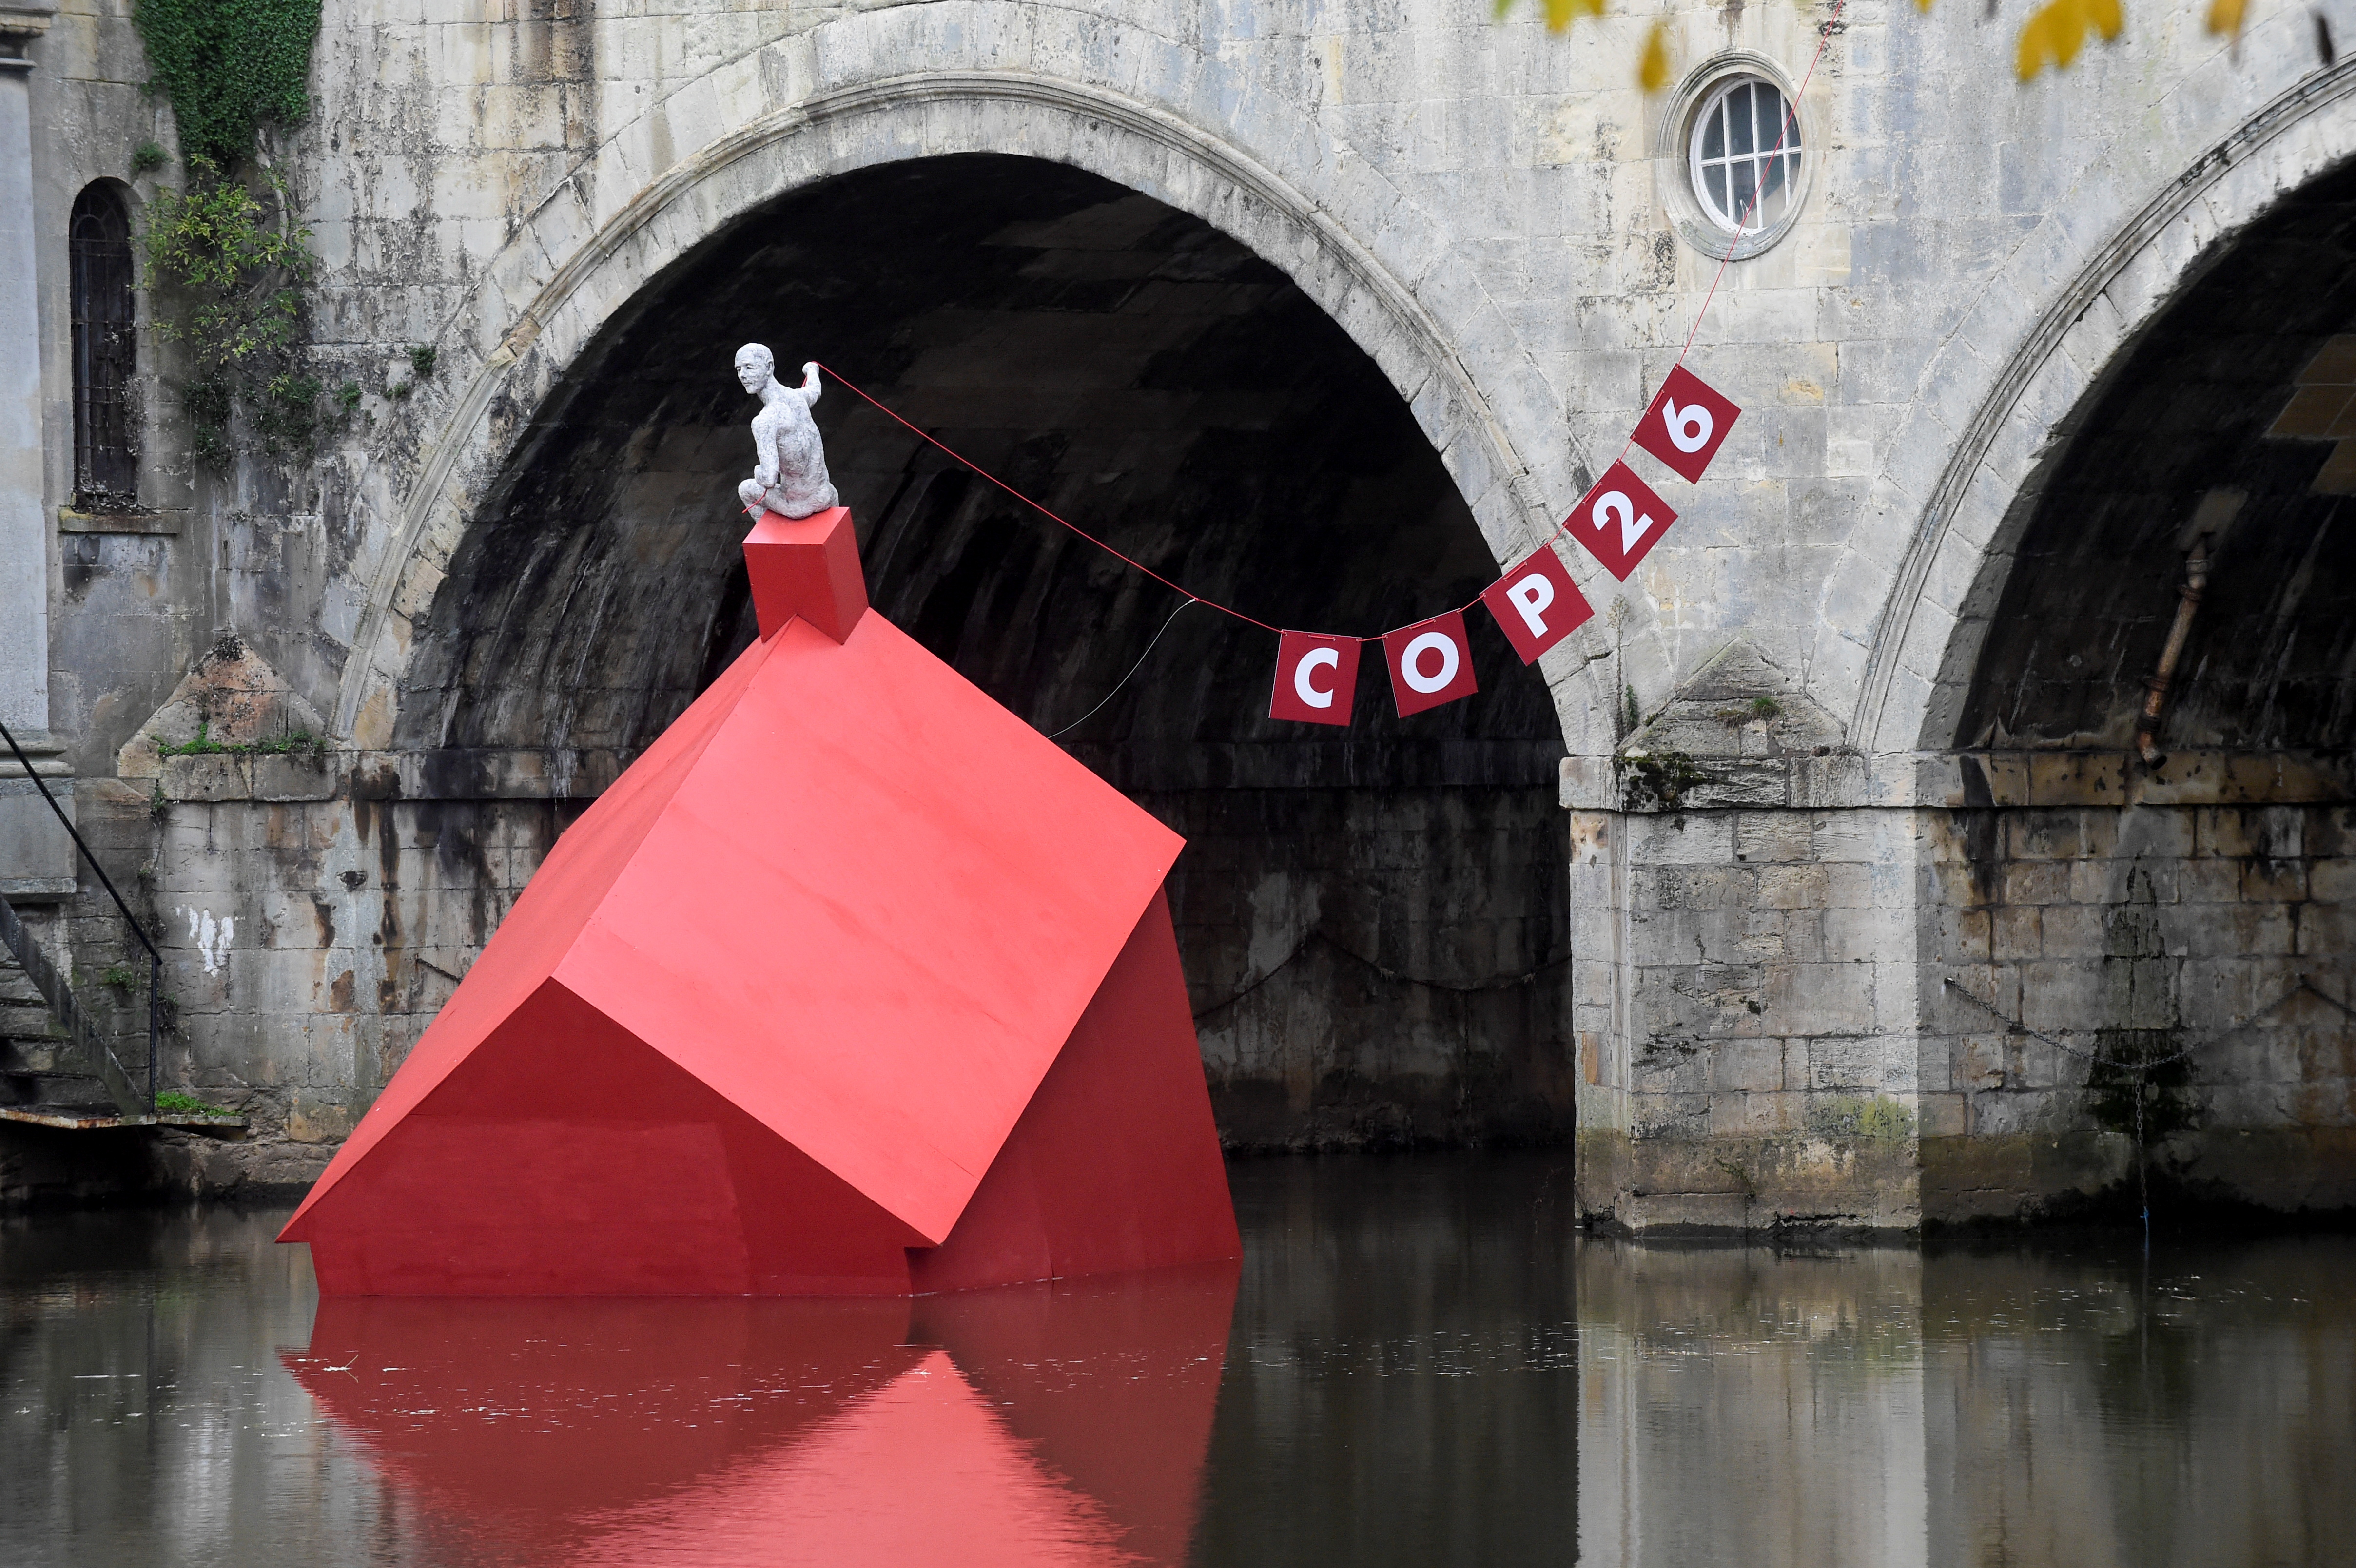 Installation highlights climate change in Bath